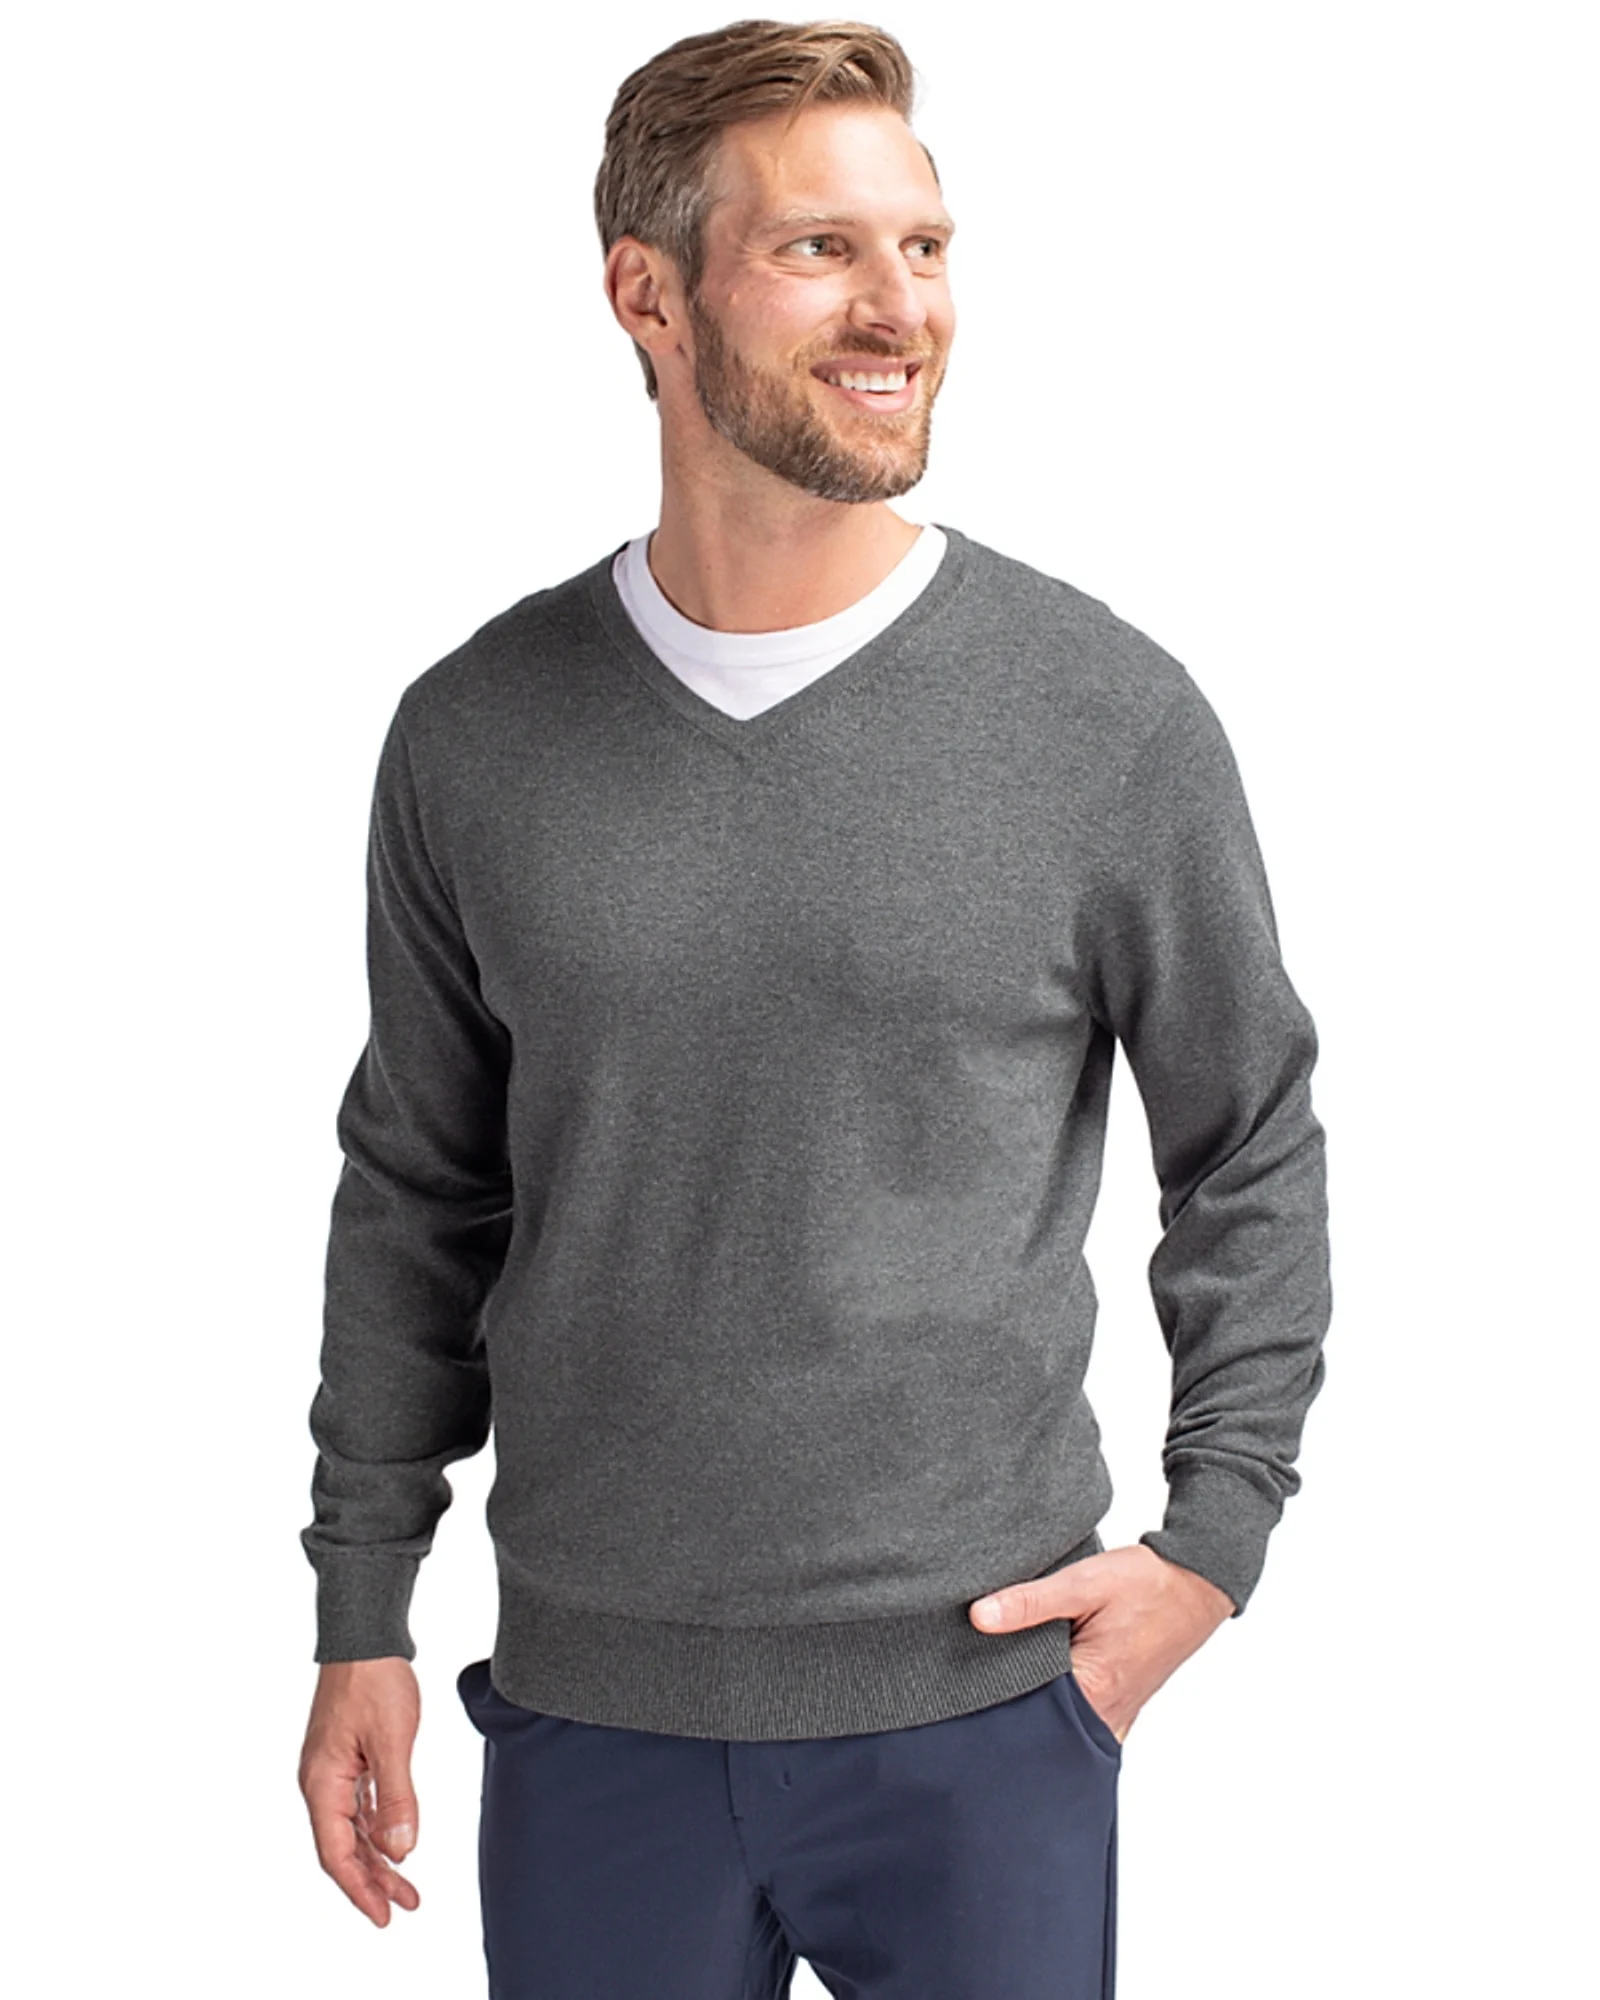 Lakemont Tri-Blend Mens V-Neck Pullover Sweater from Cutter & Buck.